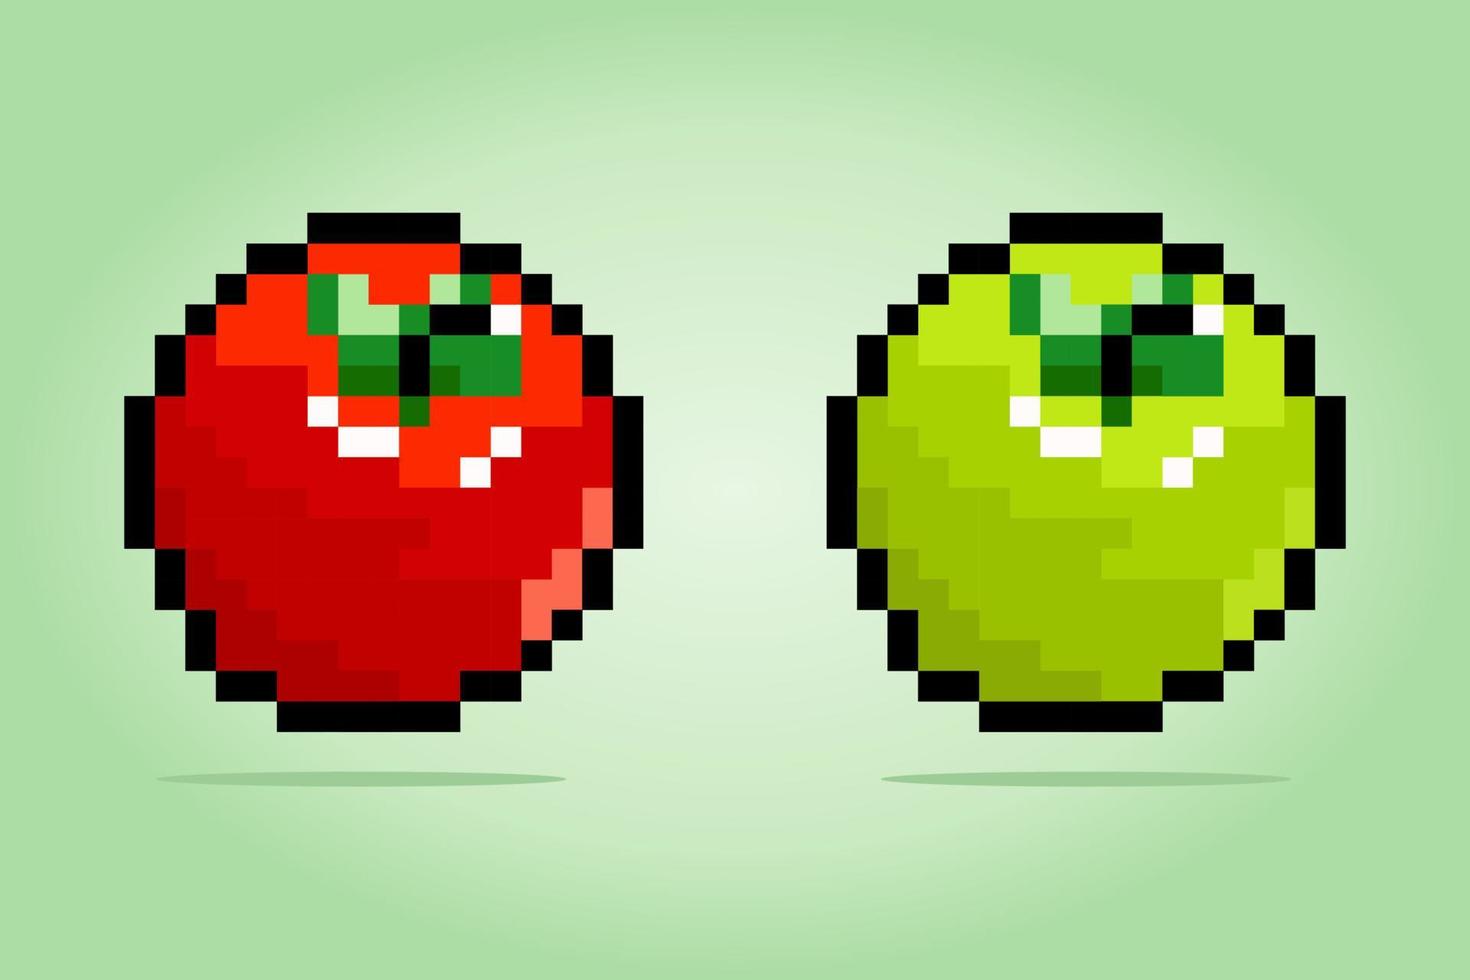 8 bit pixel tomato. Vegetables in vector illustrations for game assets and cross stitch patterns.